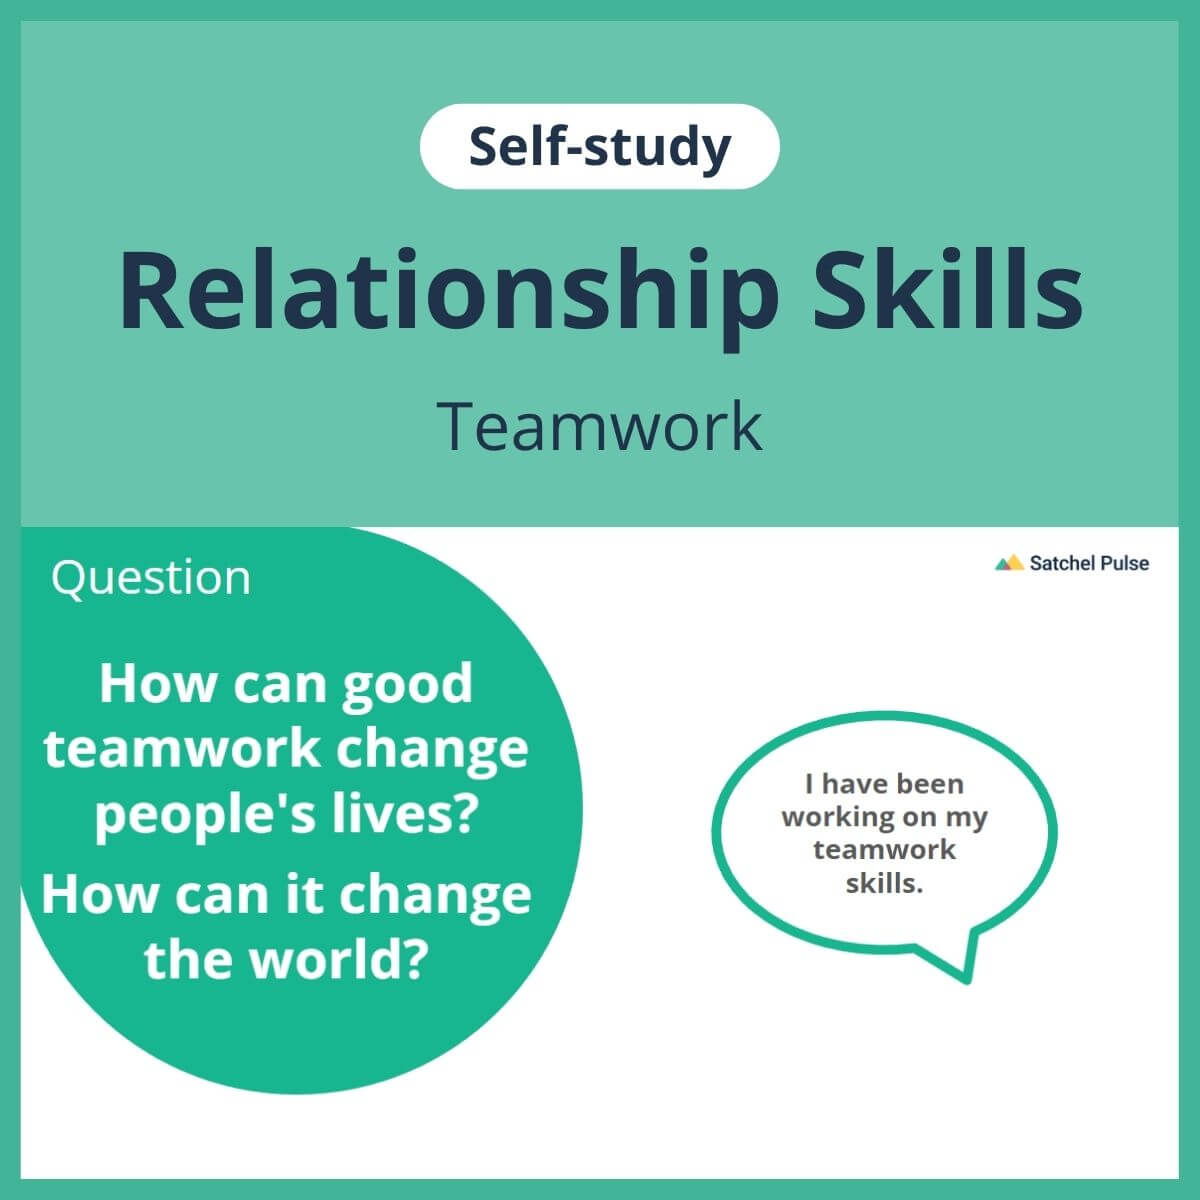 SEL self-study focusing on Team Work to use in your classroom as one of your SEL activities for Relationship Skills